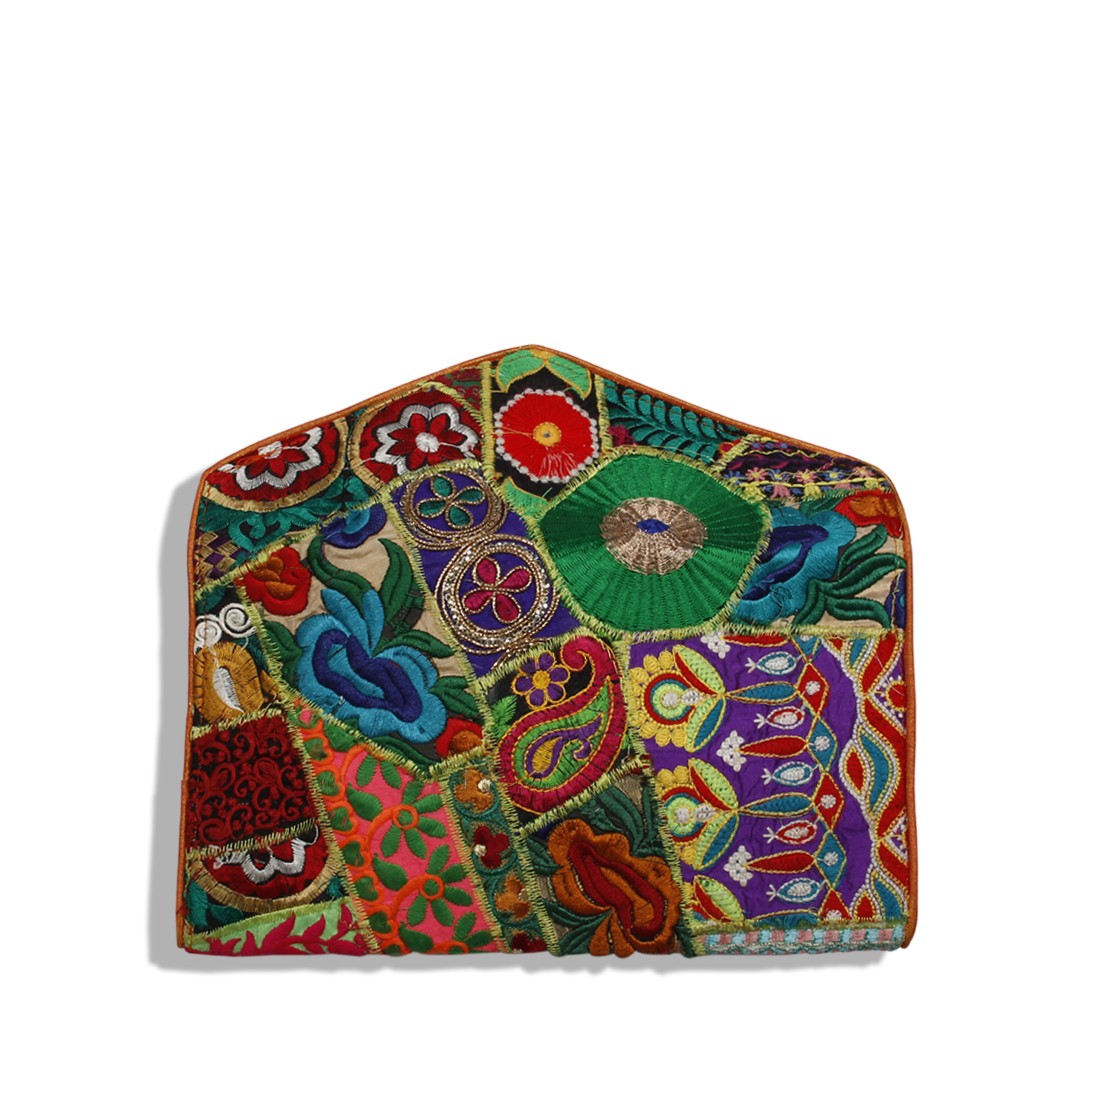 Get Indian Clutch Bags Online for traditonal Woman – betraditionalindia